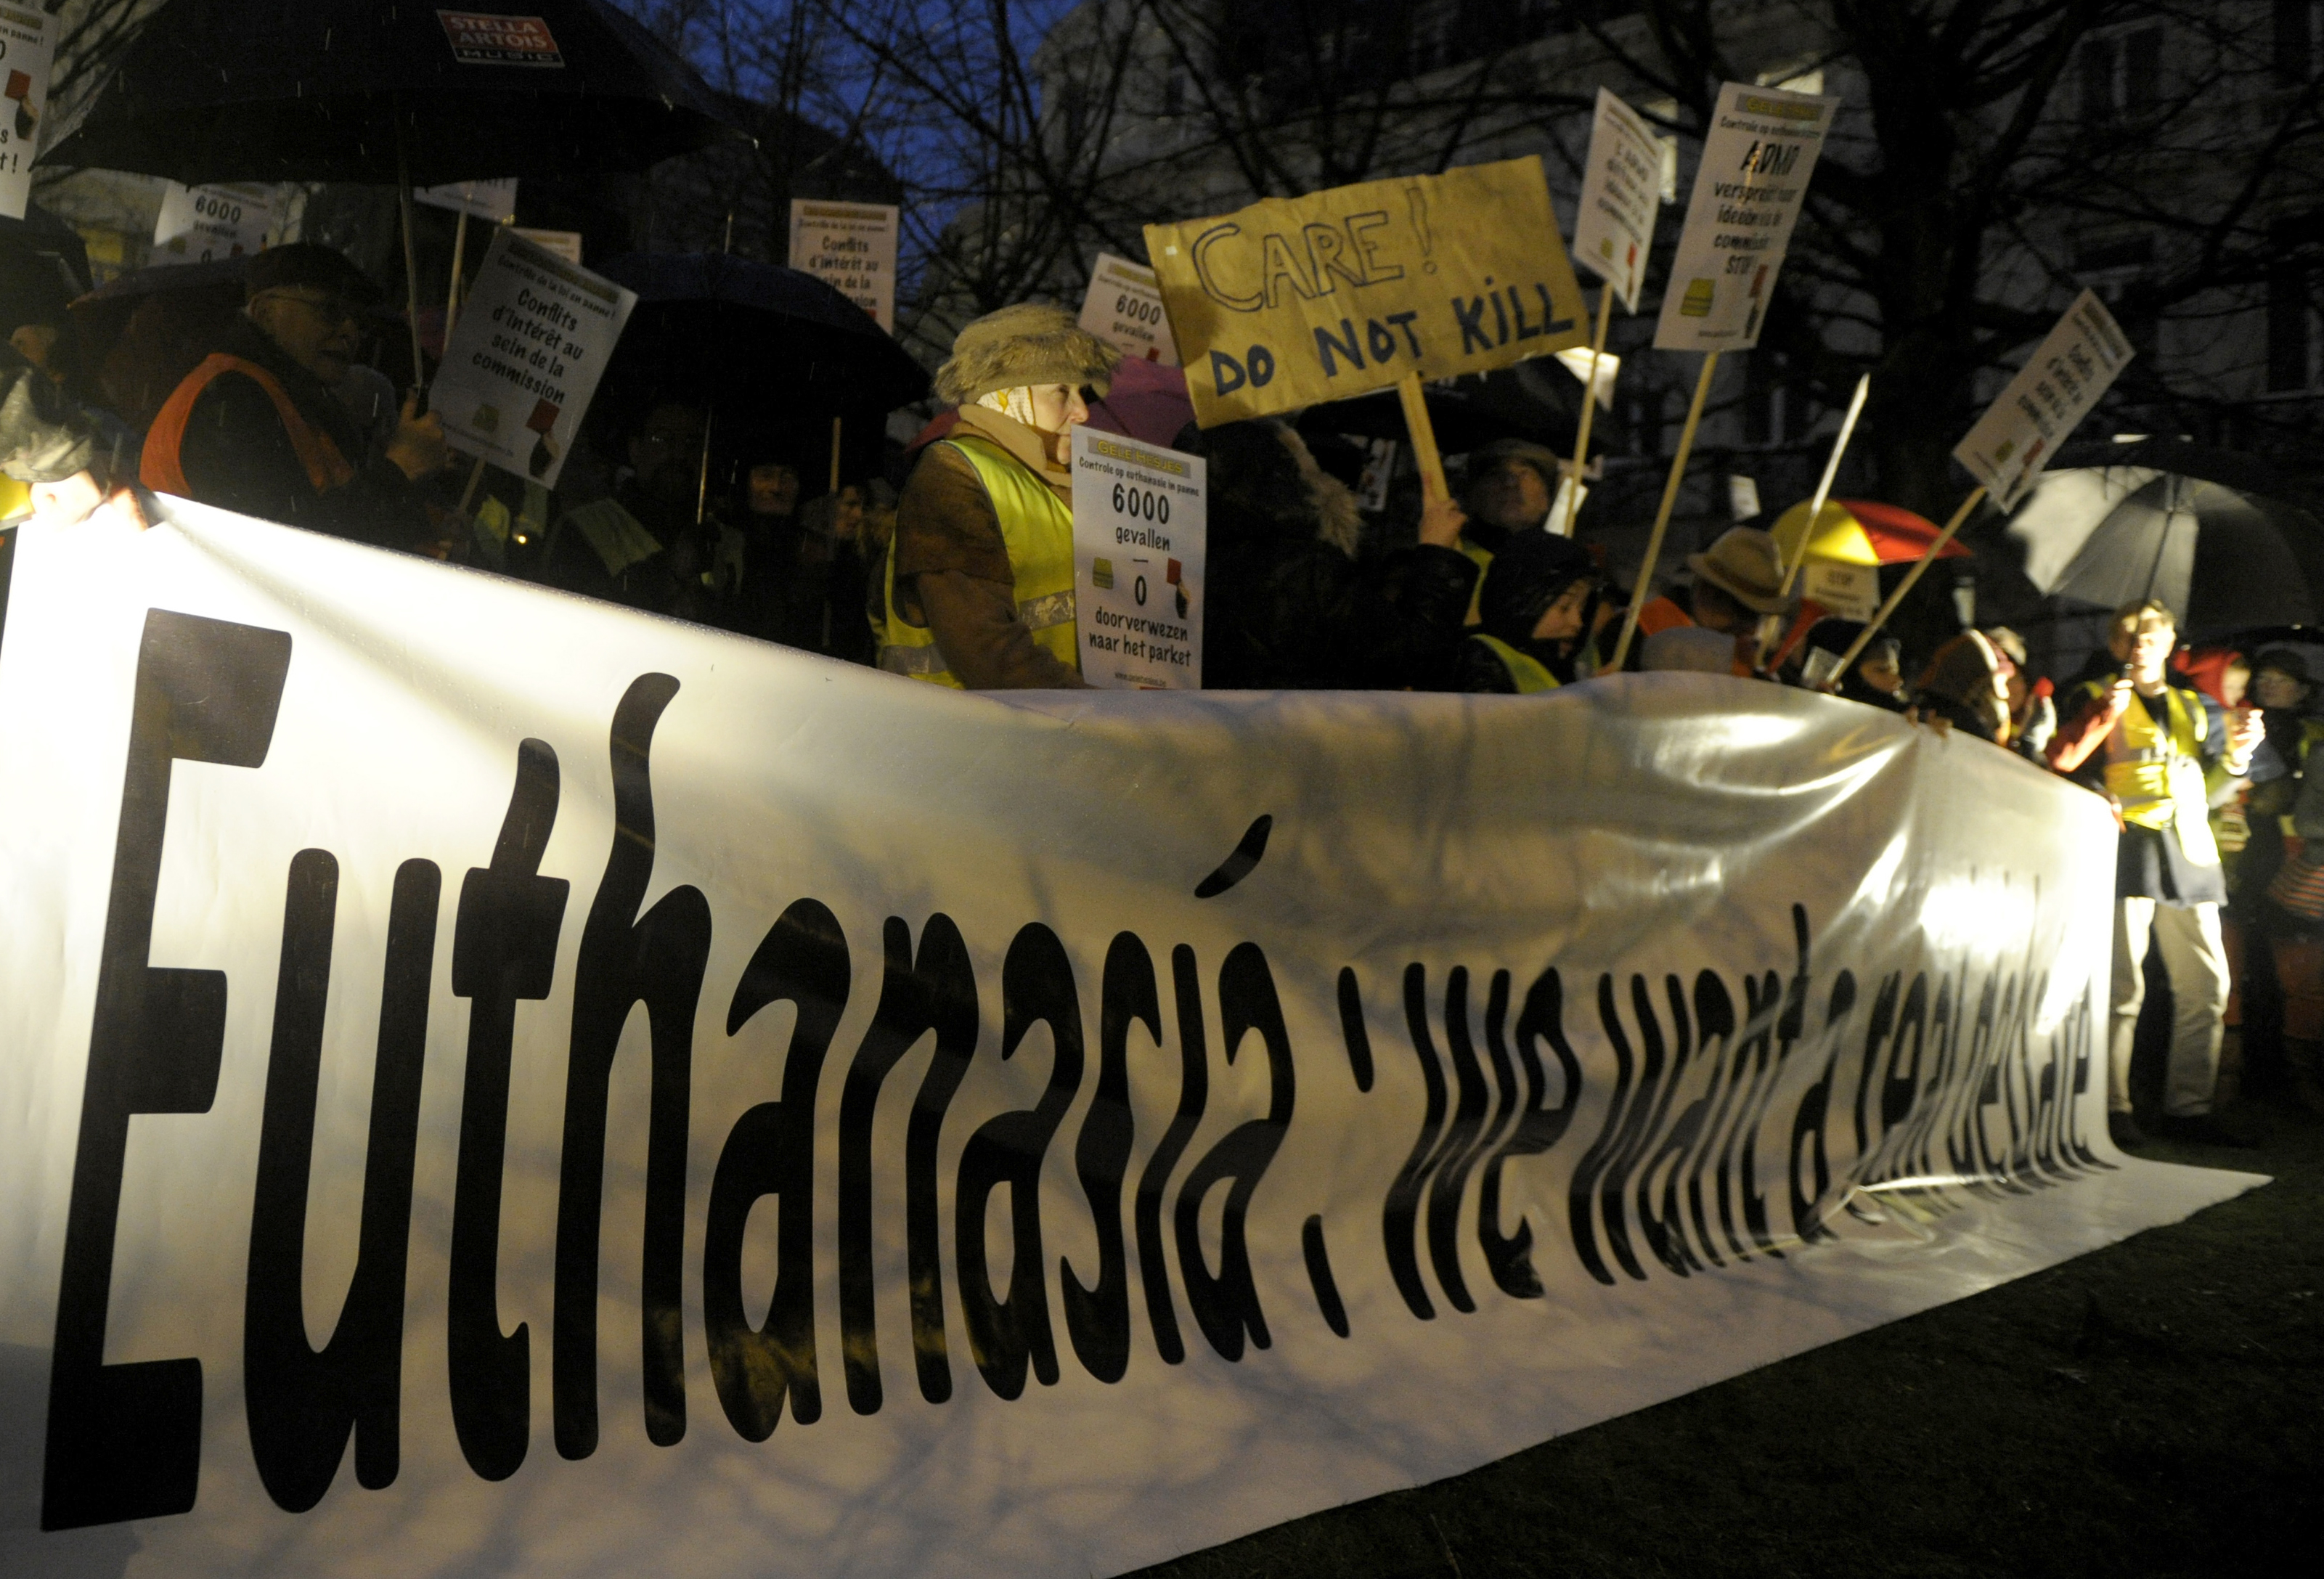 Belgian Catholics concerned about abuse of country's euthanasia law